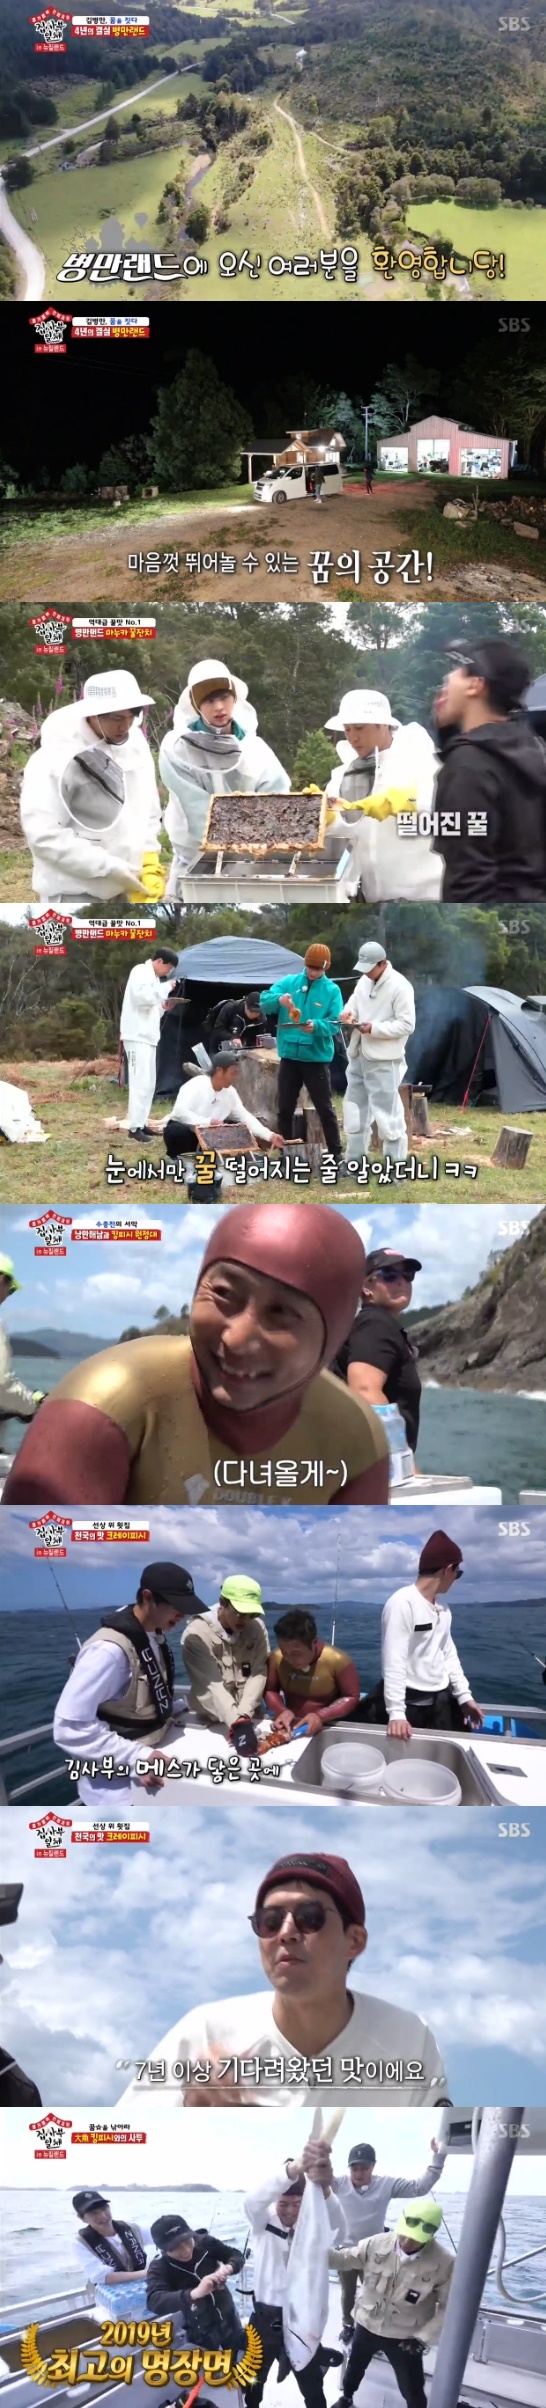 All The Butlers Kim Byung-man gave healing to his disciples in the bottle Land.On SBS All The Butlers broadcast on the 15th, Lee Sang-yoon, Lee Seung-gi, Yang Se-hyeong and Yook Sungjae were pictured sleeping in the tent.Kim Byung-man, who appeared on the plane on the day, took his disciples to the Land.Kim Byung-man said, There is a person who likes nature like me. He lent the land and allowed Kim Byung-man to Lay freely.Ive only been in a little bit of my space, and I havent been in it yet, I havent been in more than a third, Kim Byung-man explained.Then, for the first time, the Byeonman was released. There were works made by Kim Byung-man, including treehouses and fireplaces.Kim Byung-man revealed it took four years to clear the abandoned trees after logging and make them this much.The disciples, unable to keep quiet, searched for a place to sleep; the disciples, who saw a space like the Hobbit House, were relished, but it was a toilet; Kim Byung-man said, But there is no bathroom door.There was no ladder in the treehouse; Yang Se-hyeong, who struggled up, laughed when he said, Why did you make this?I feel romantic that it is delicious to bake trees in this atmosphere, said Yang Se-hyeong, a sausage grilled first.However, Yang Se-hyeongs sausage was black, and What is the use of eating something burned in nature? Kim Byung-man admitted, I can not direct it when I eat it.The disciples who slept in the tent woke up the next day to the sound of an excavator, Kim Byung-man trying to make a wood stove.Kim Byung-man and his disciples wore work clothes to get manuka honey, and Lee Seung-gi, who saw manuka honey, said, Its a bottle and a lot of honey.I stole it, he said.Then, the toast with the egg fried and honey was completed.Lee Seung-gi said, It is the best food I have eaten in three months. Yook Sungjae said, All The Butlers class is the past.Lee Seung-gi is surprised, saying, I am a child without a good idea. Kim Byung-man was proud that I feel like you are really healing.Kim Byung-man and his disciples then went fishing; Kim Byung-man jumped into the sea to give his disciples a taste of the Klayfish.Kim Byung-man, who eventually caught the KLayfish, groomed for his disciples, and Lee Sang-yoon was thrilled that I have been really waiting for more than seven years.Lee Sang-yoon then snatched the King Fish.Photo = SBS Broadcasting Screen